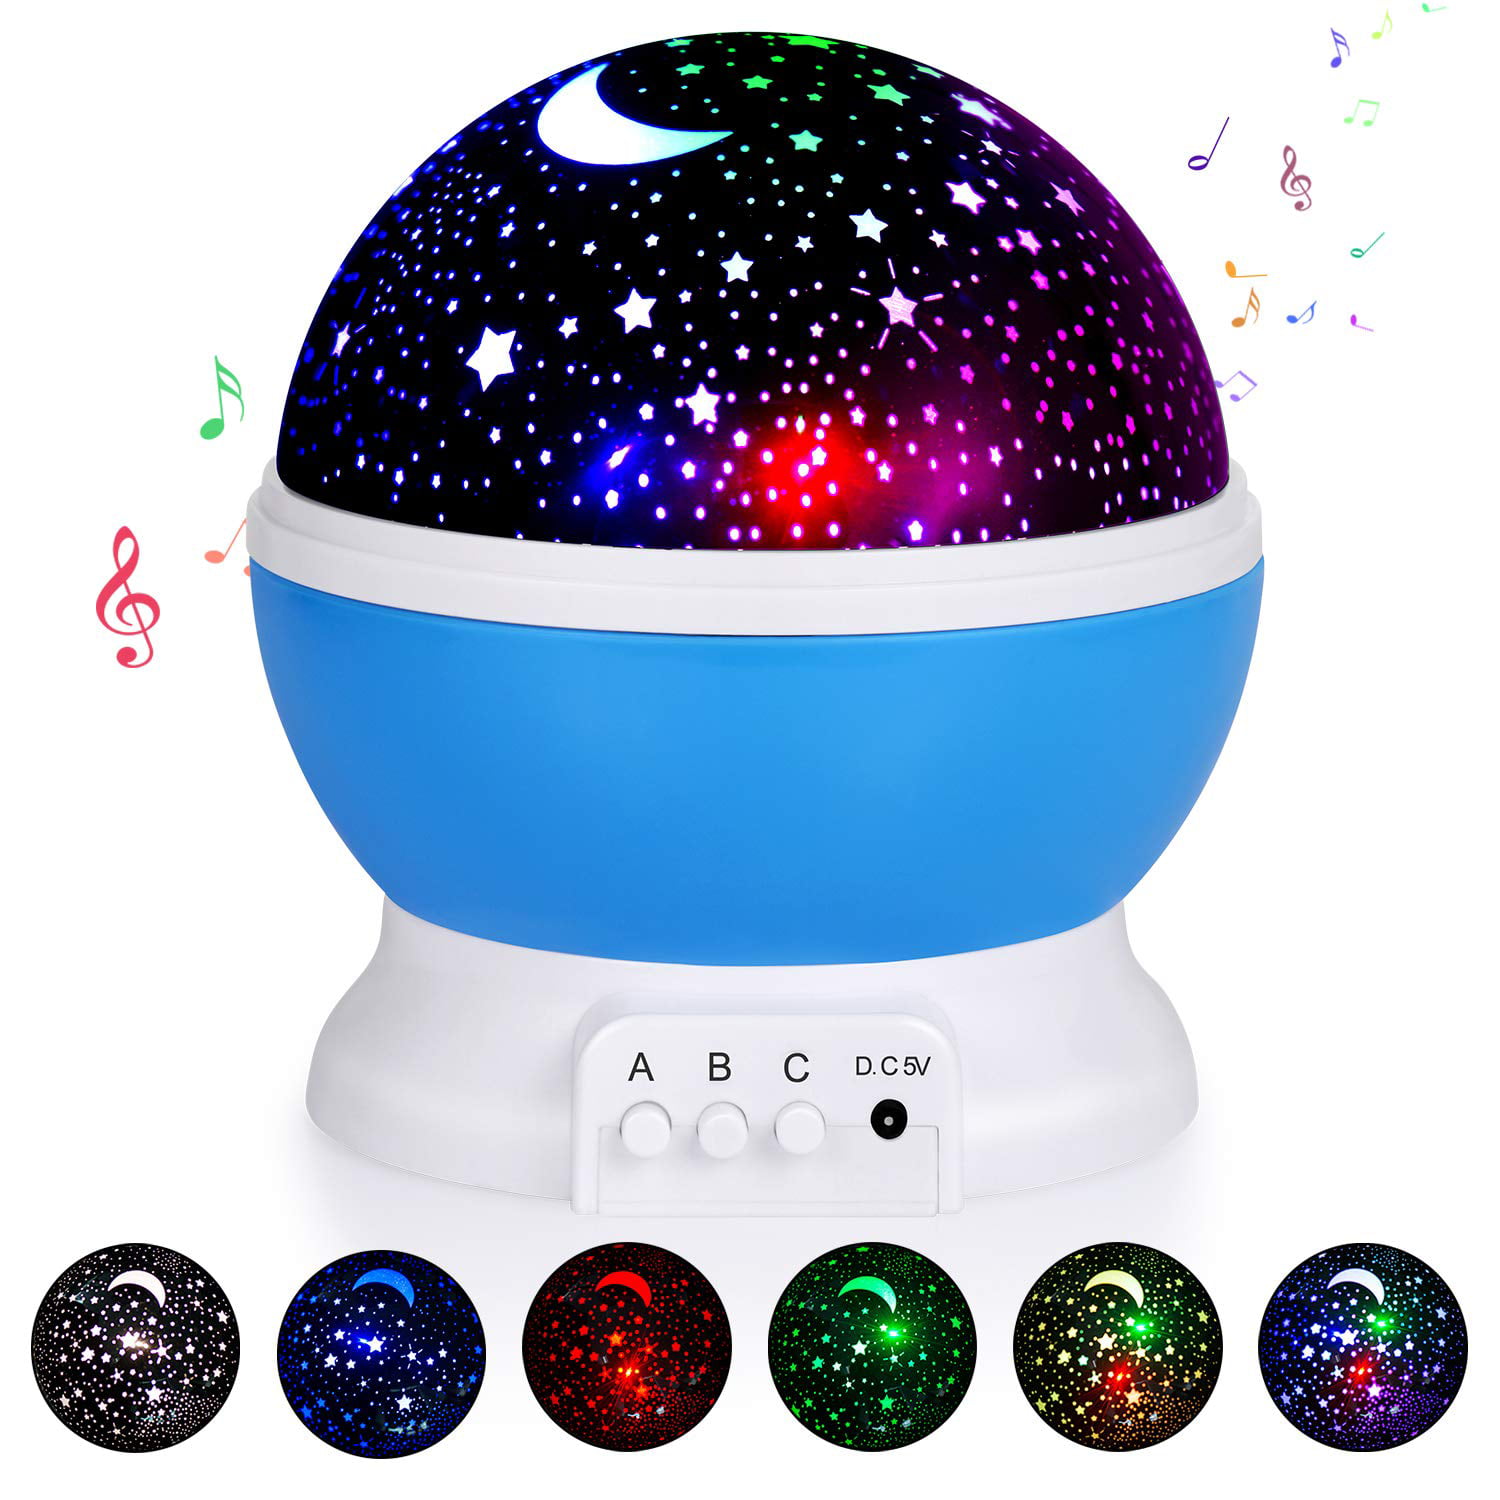 Black Cute Gentle Warm Baby Star Light Projector with Master Switch Rotation and Double Projection Mode Night Lights for Kids 